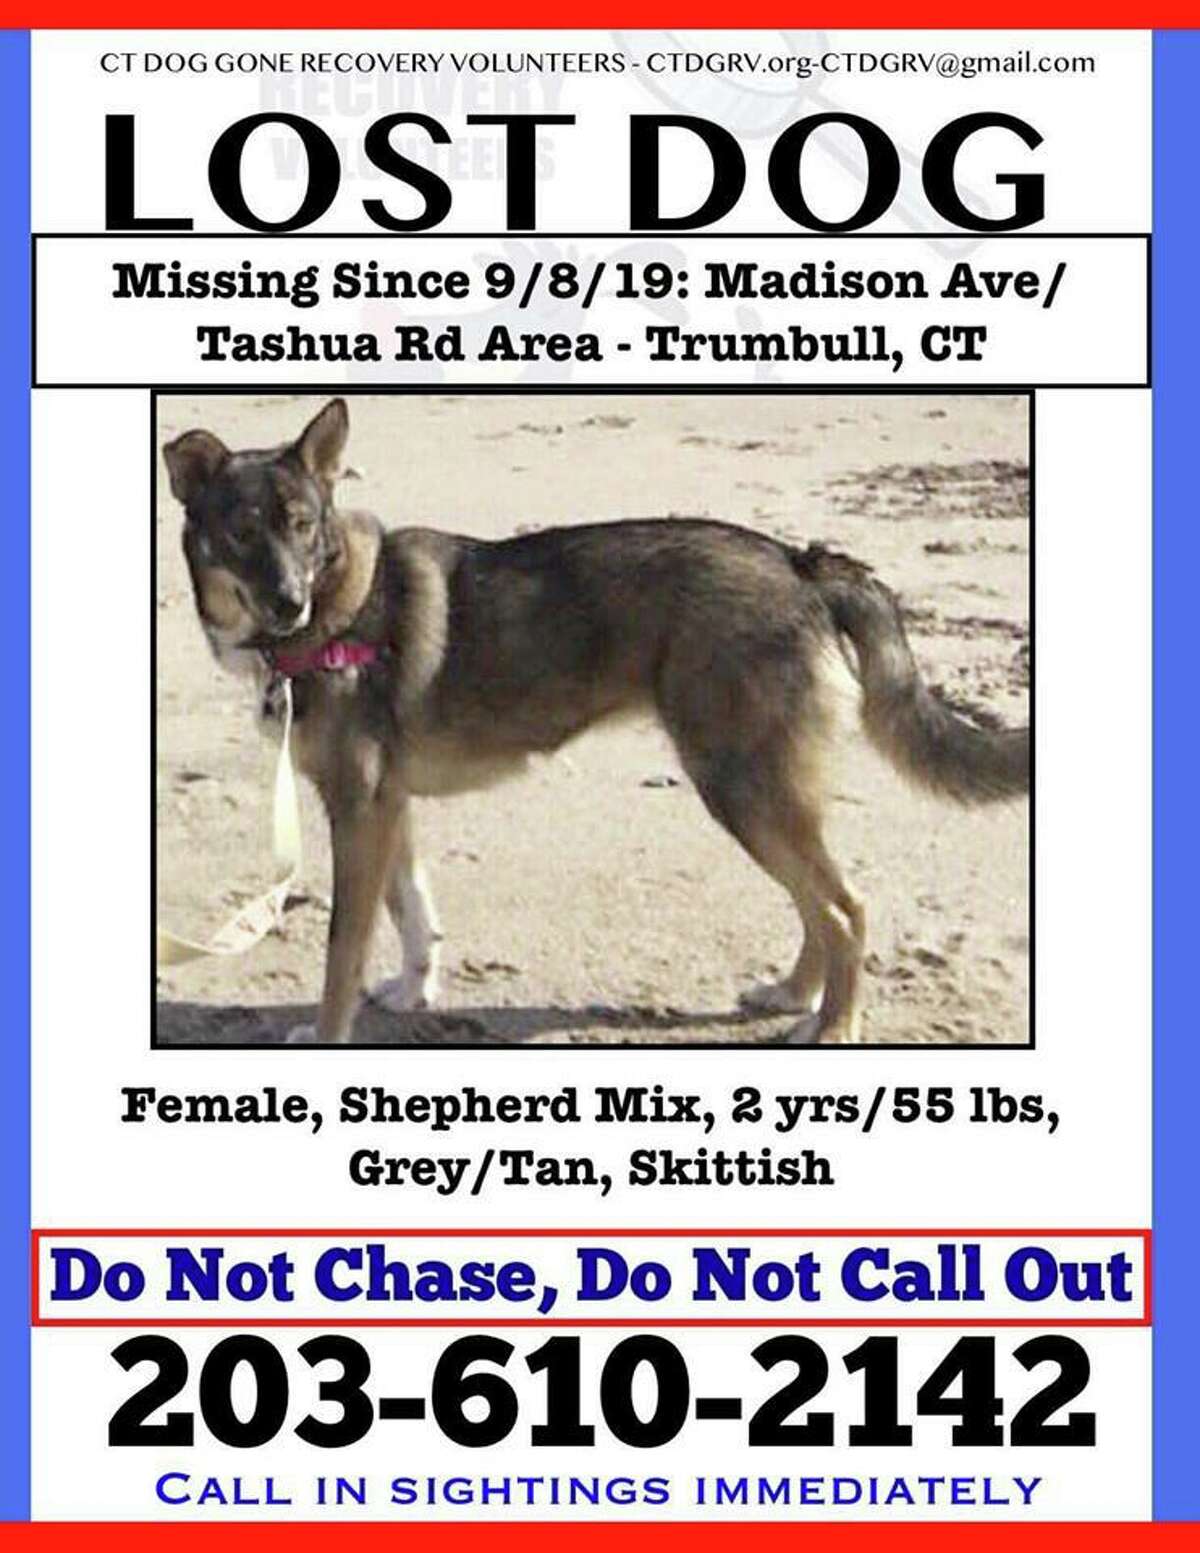 A 55-pound husky mix has been reported missing from the Tashua Knolls area.